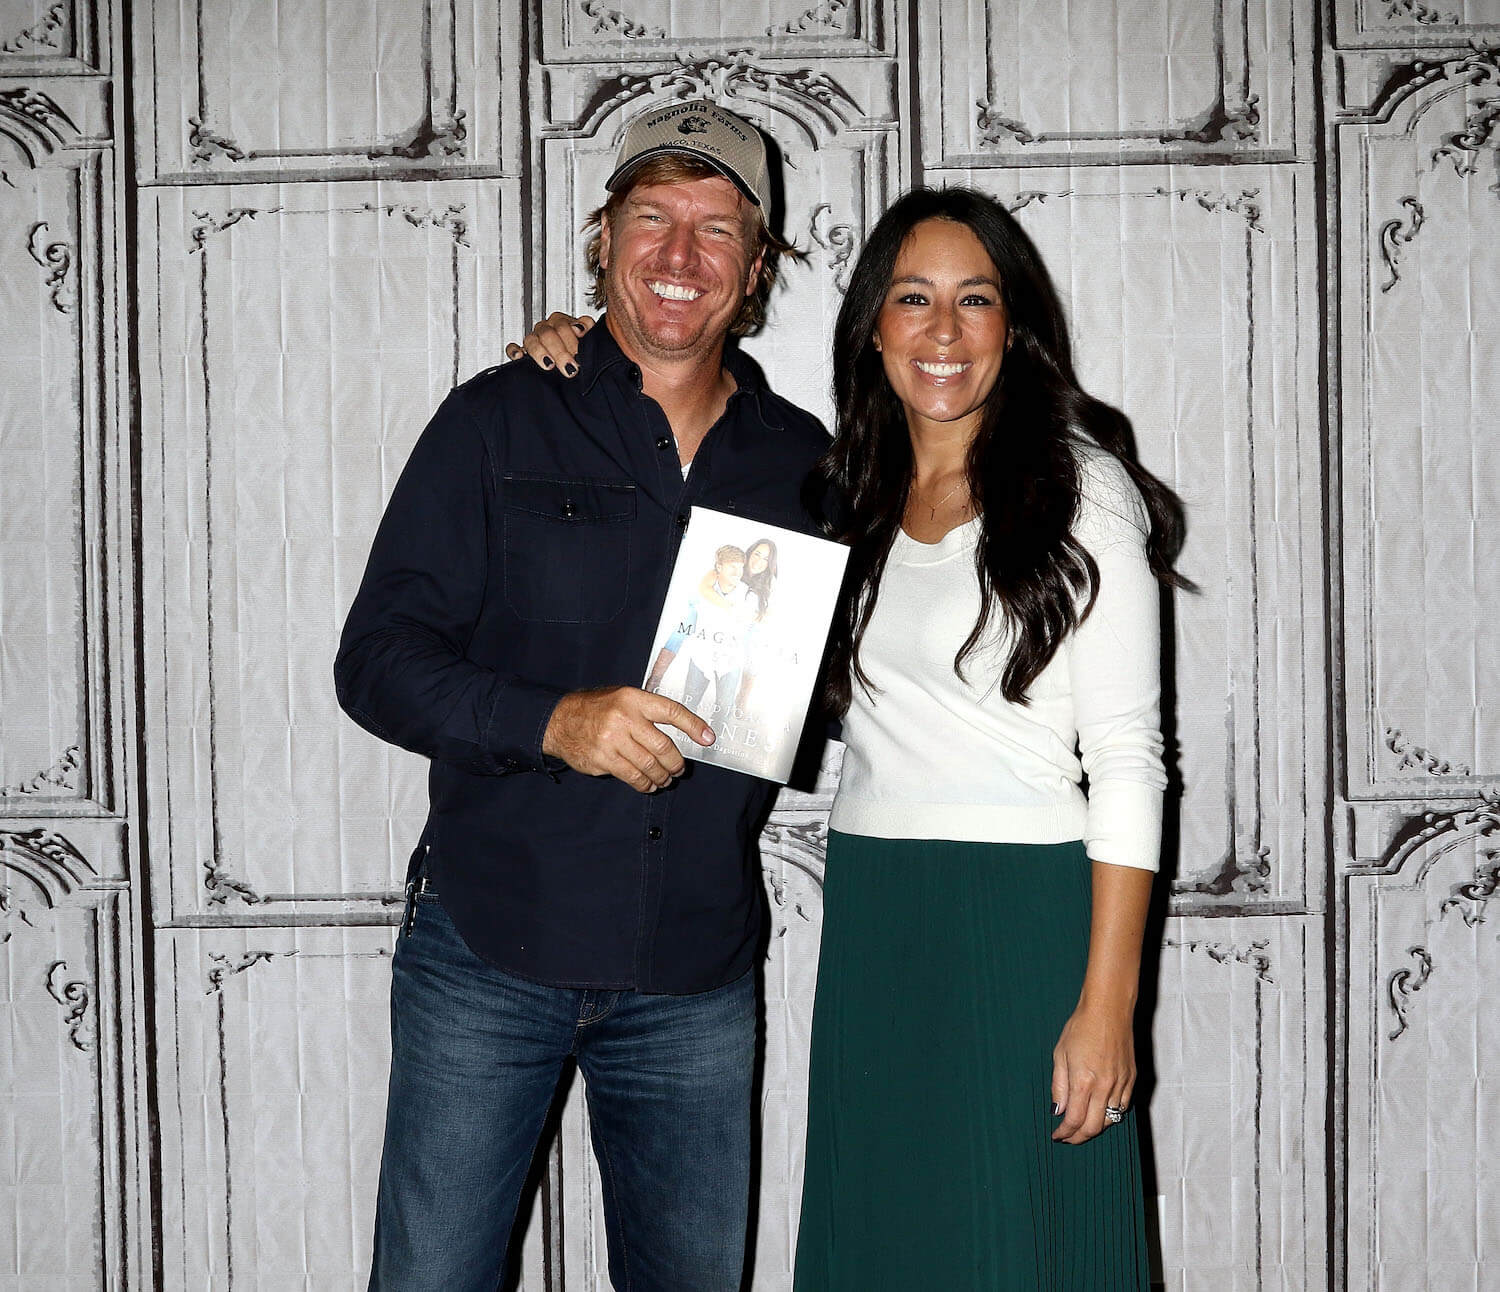 Chip and Joanna Gaines from 'Fixer Upper' smiling while holding their memoir about Magnolia